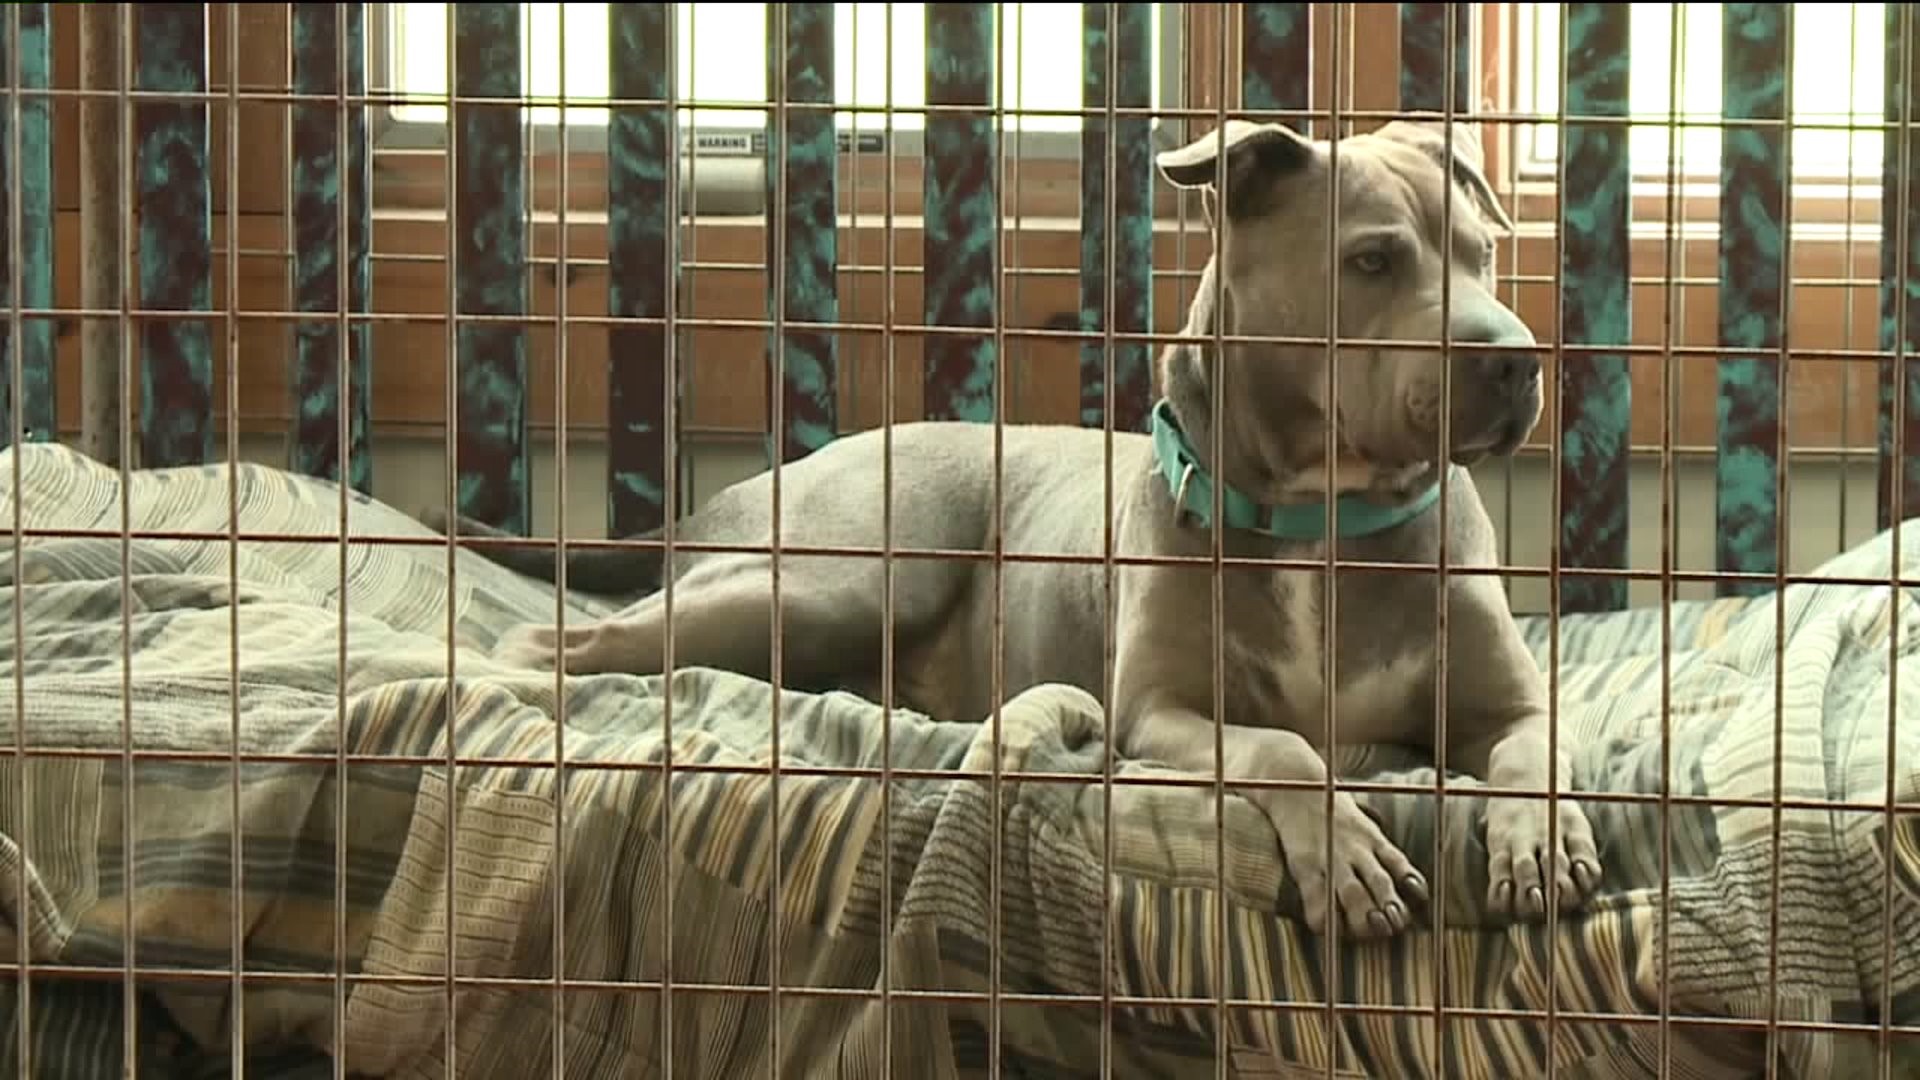 Free Adoptions at Animal Shelter in Susquehanna County